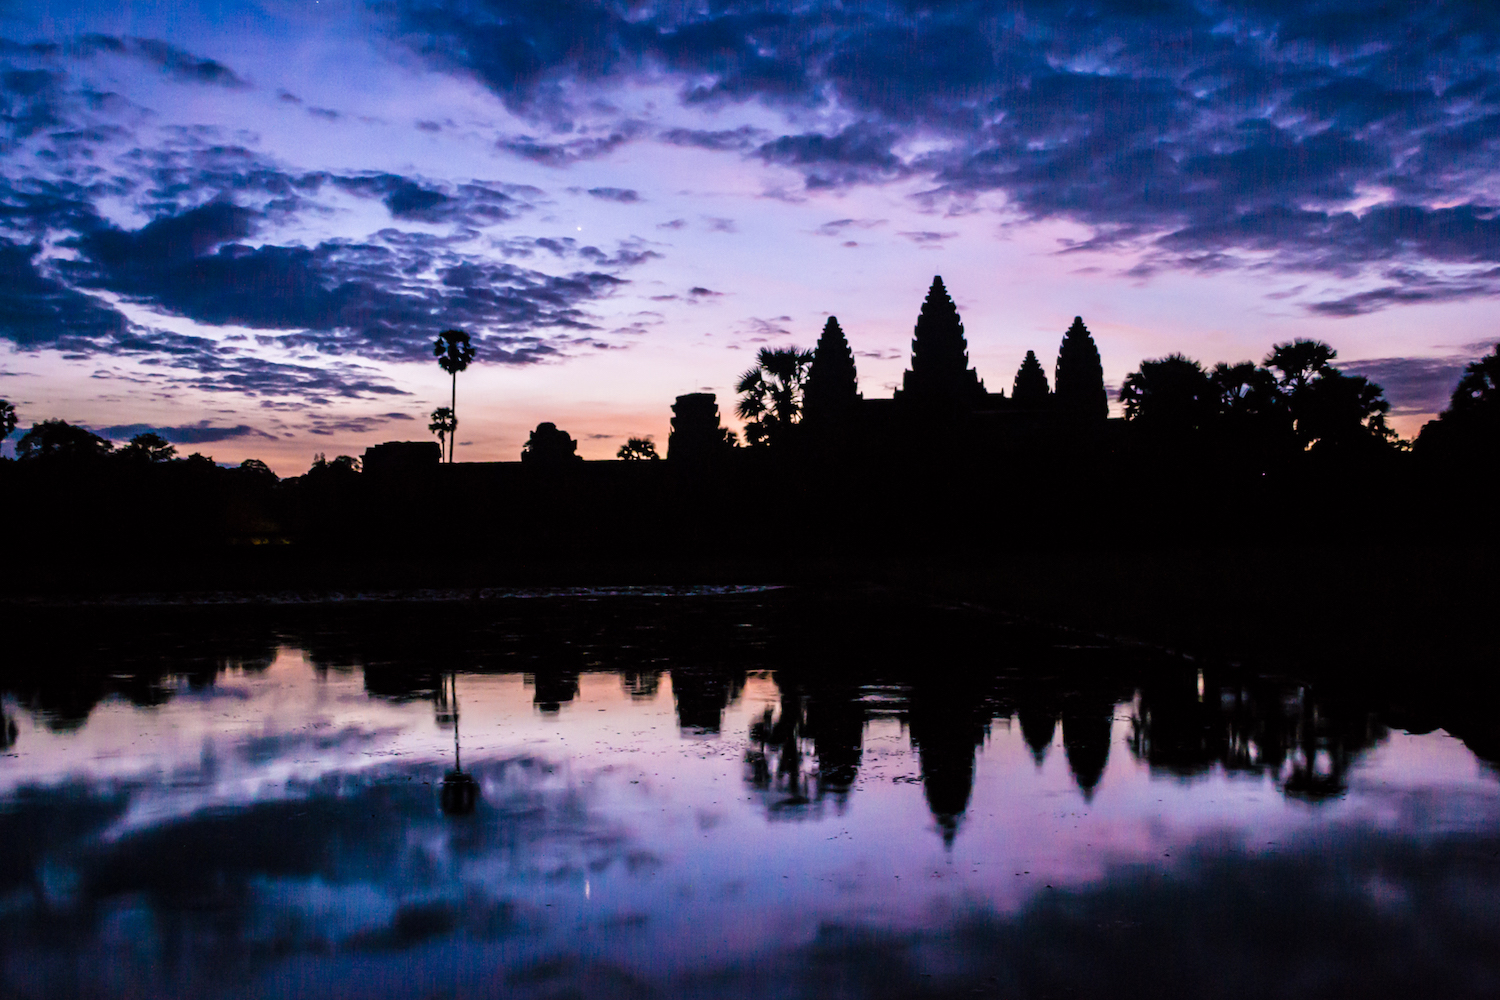 Angkor Wat, Siem Reap is definitely one of the can't miss places in southeast asia.